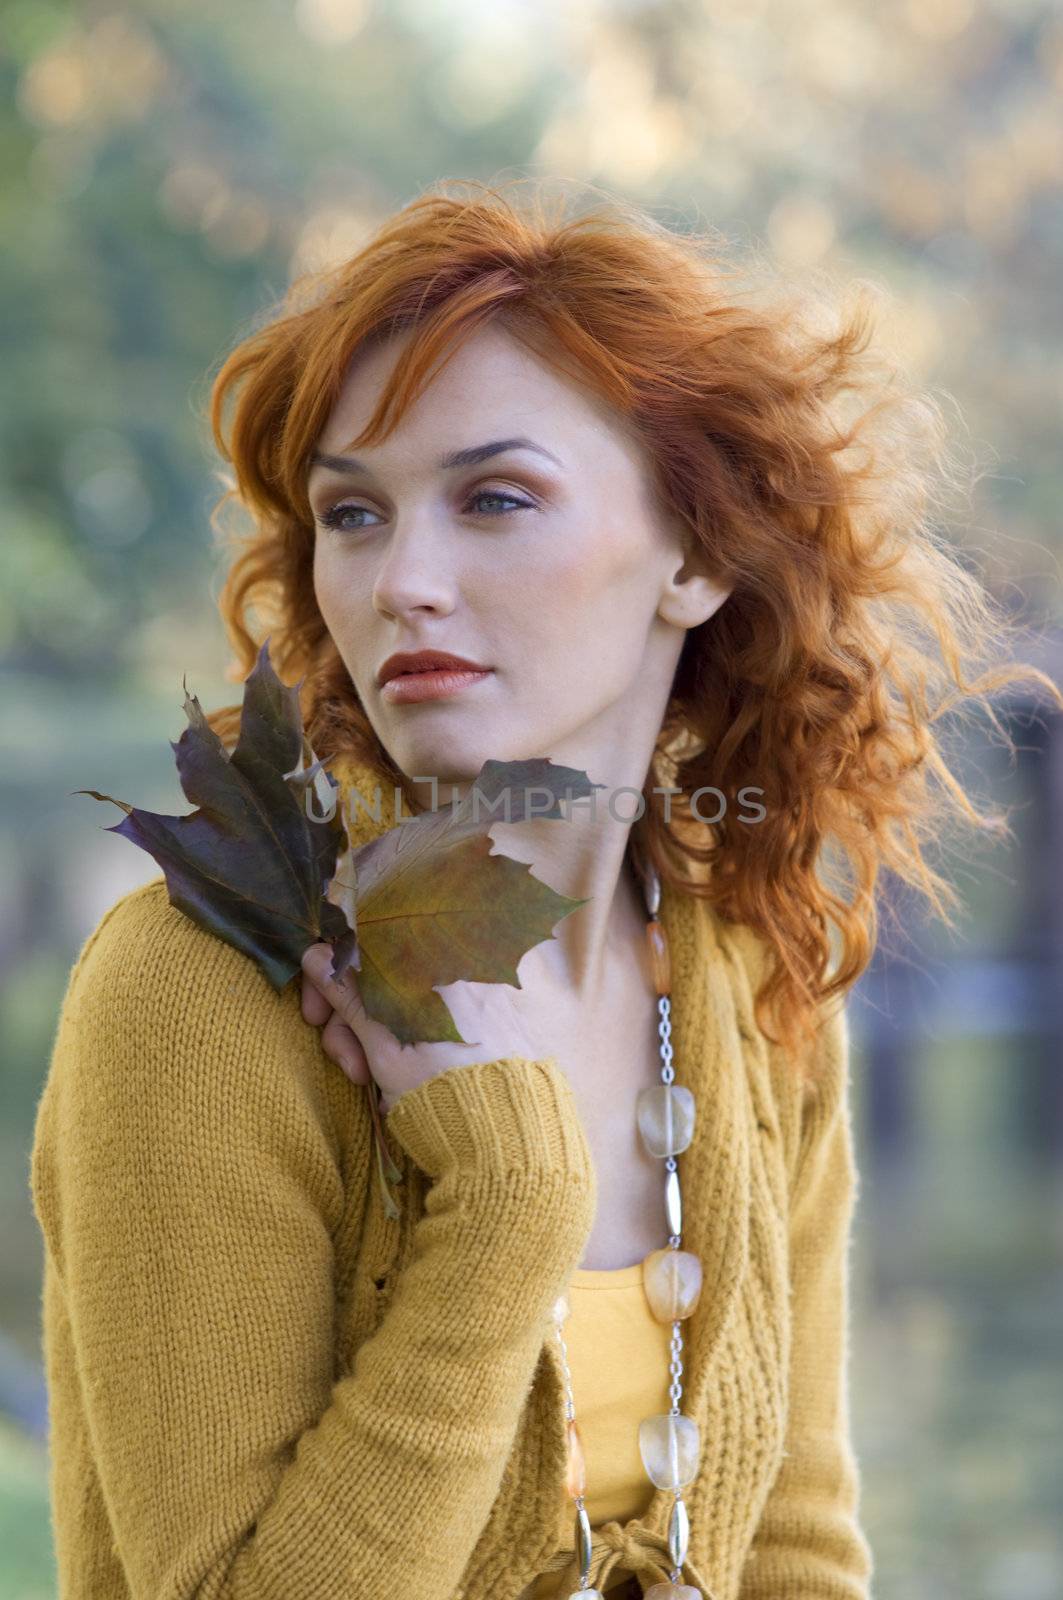 close up of red-haired woman with some leaves near face in park